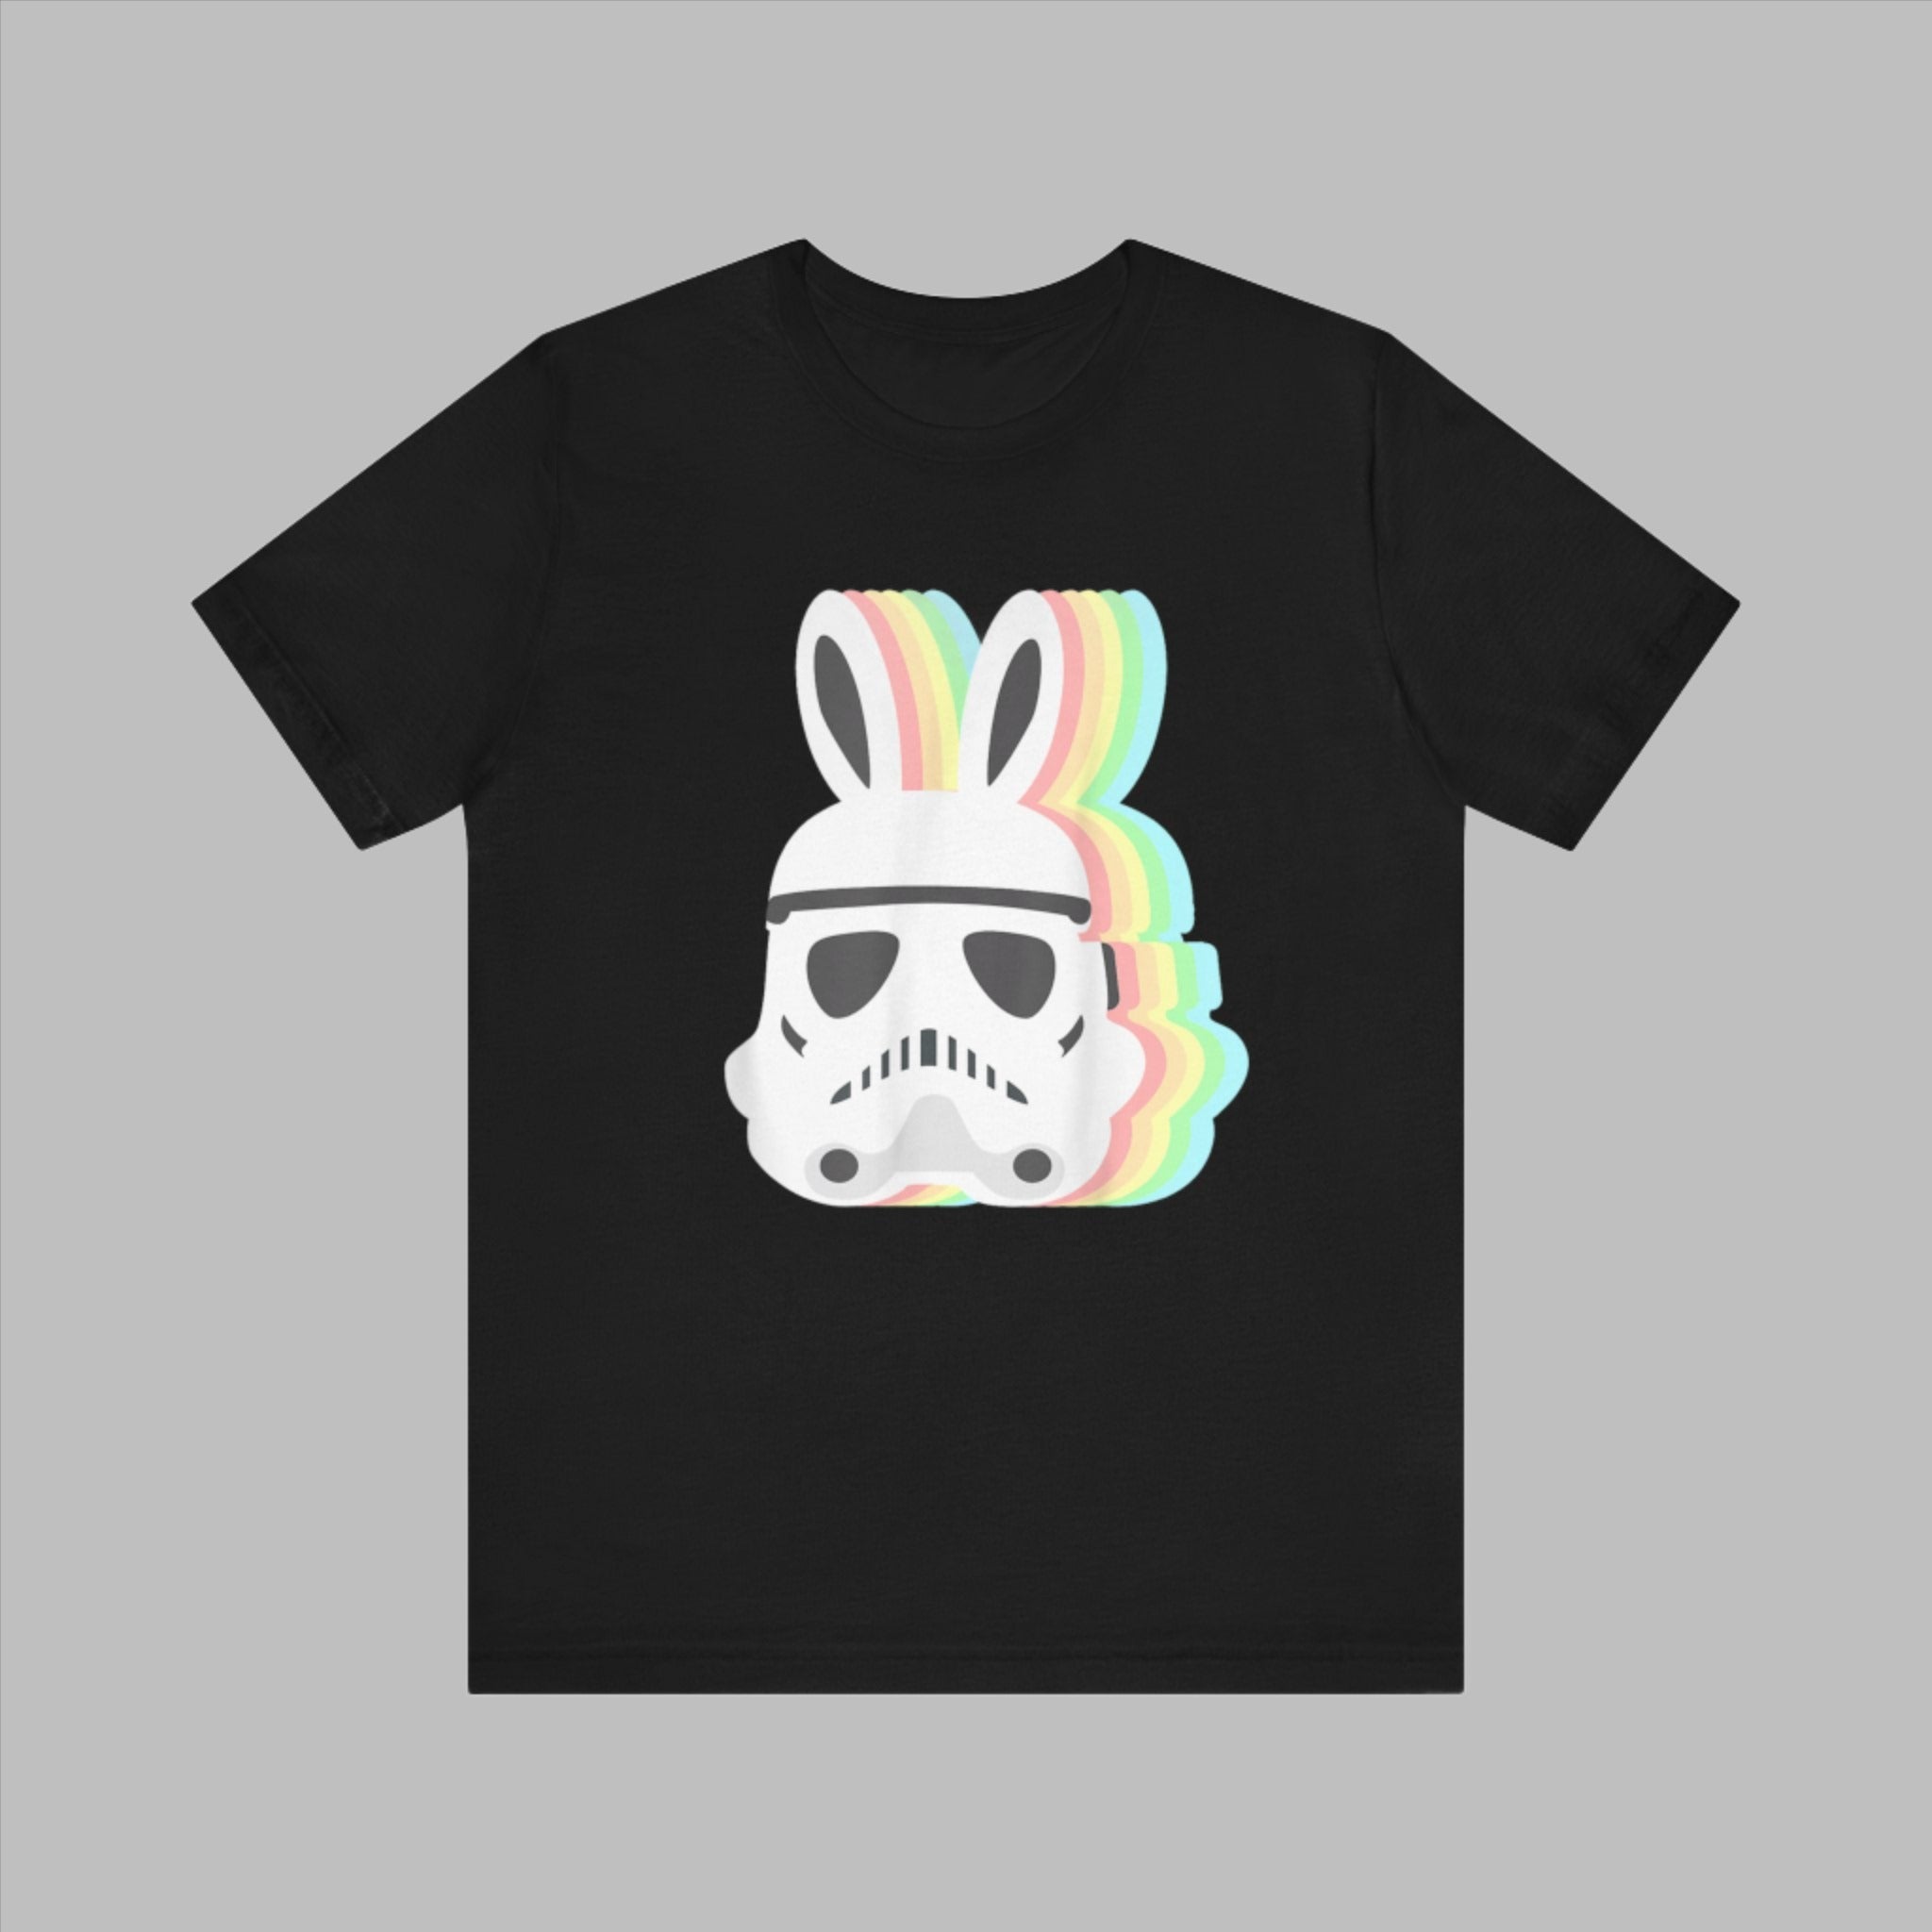 Black tee featuring a print of the Easter Stormtrooper Bunny helmet topped with rainbow-colored bunny ears.